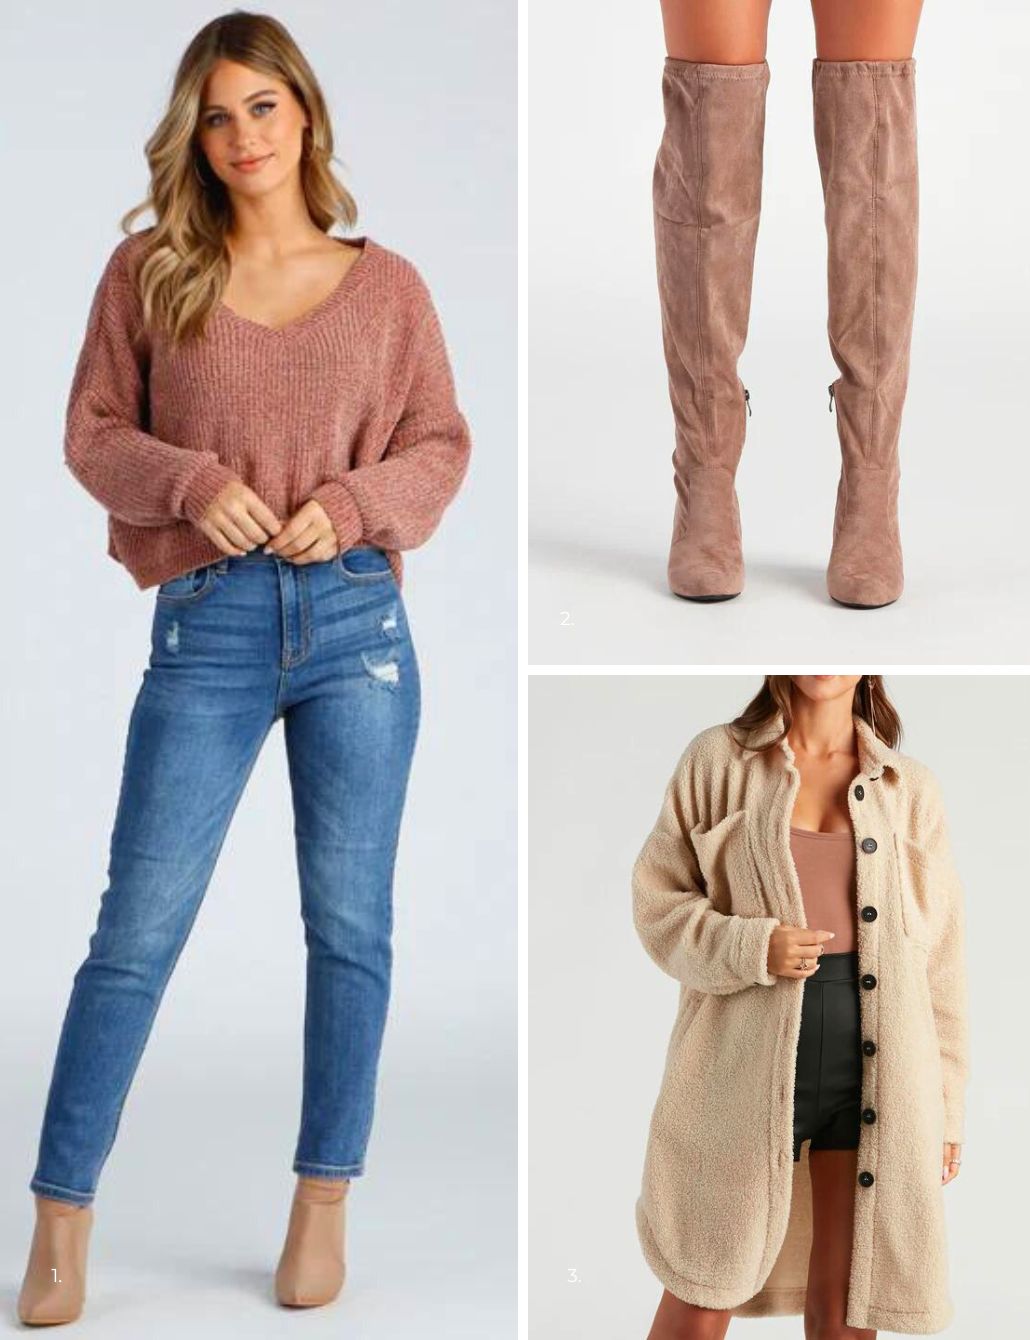 Can I wear knee high boots with jeans tucked in, paired with a sweater/top  to work? My future workplace says wear whatever you're comfortable in  (including Uggs). I want to be comfortable